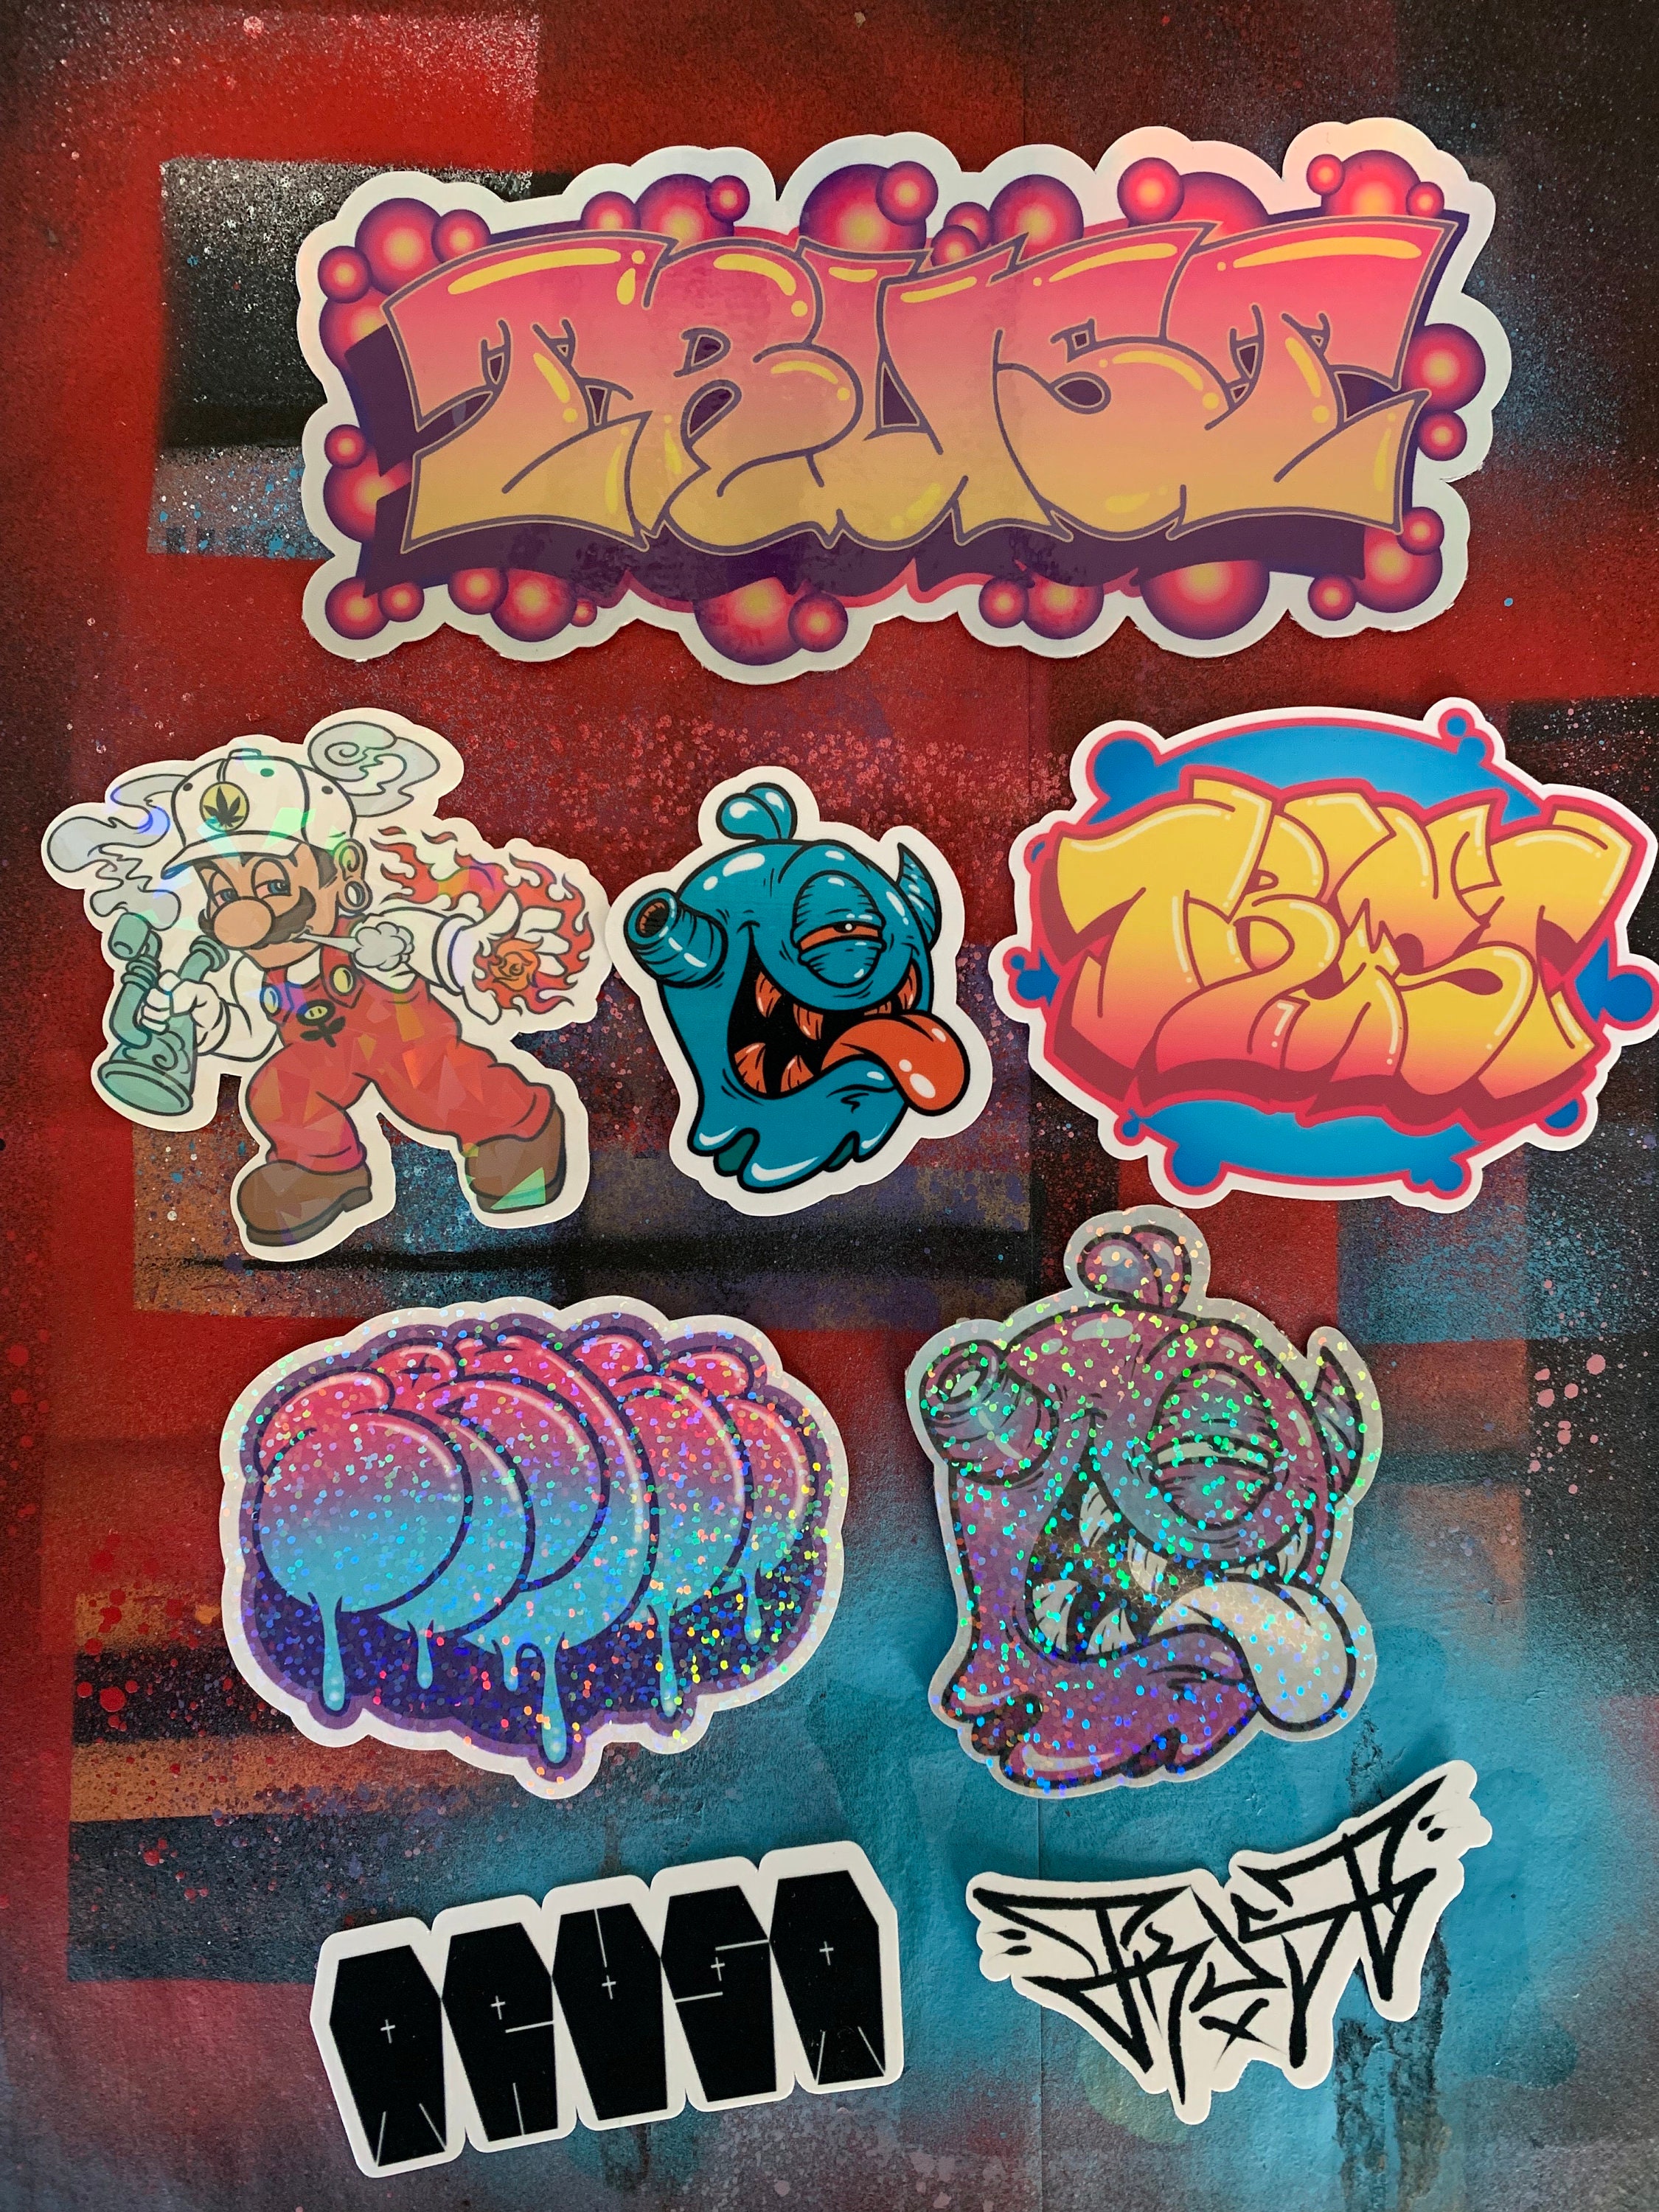 Holographic Sticker Pack - 3 Square Vinyl Stickers - Limited Edition